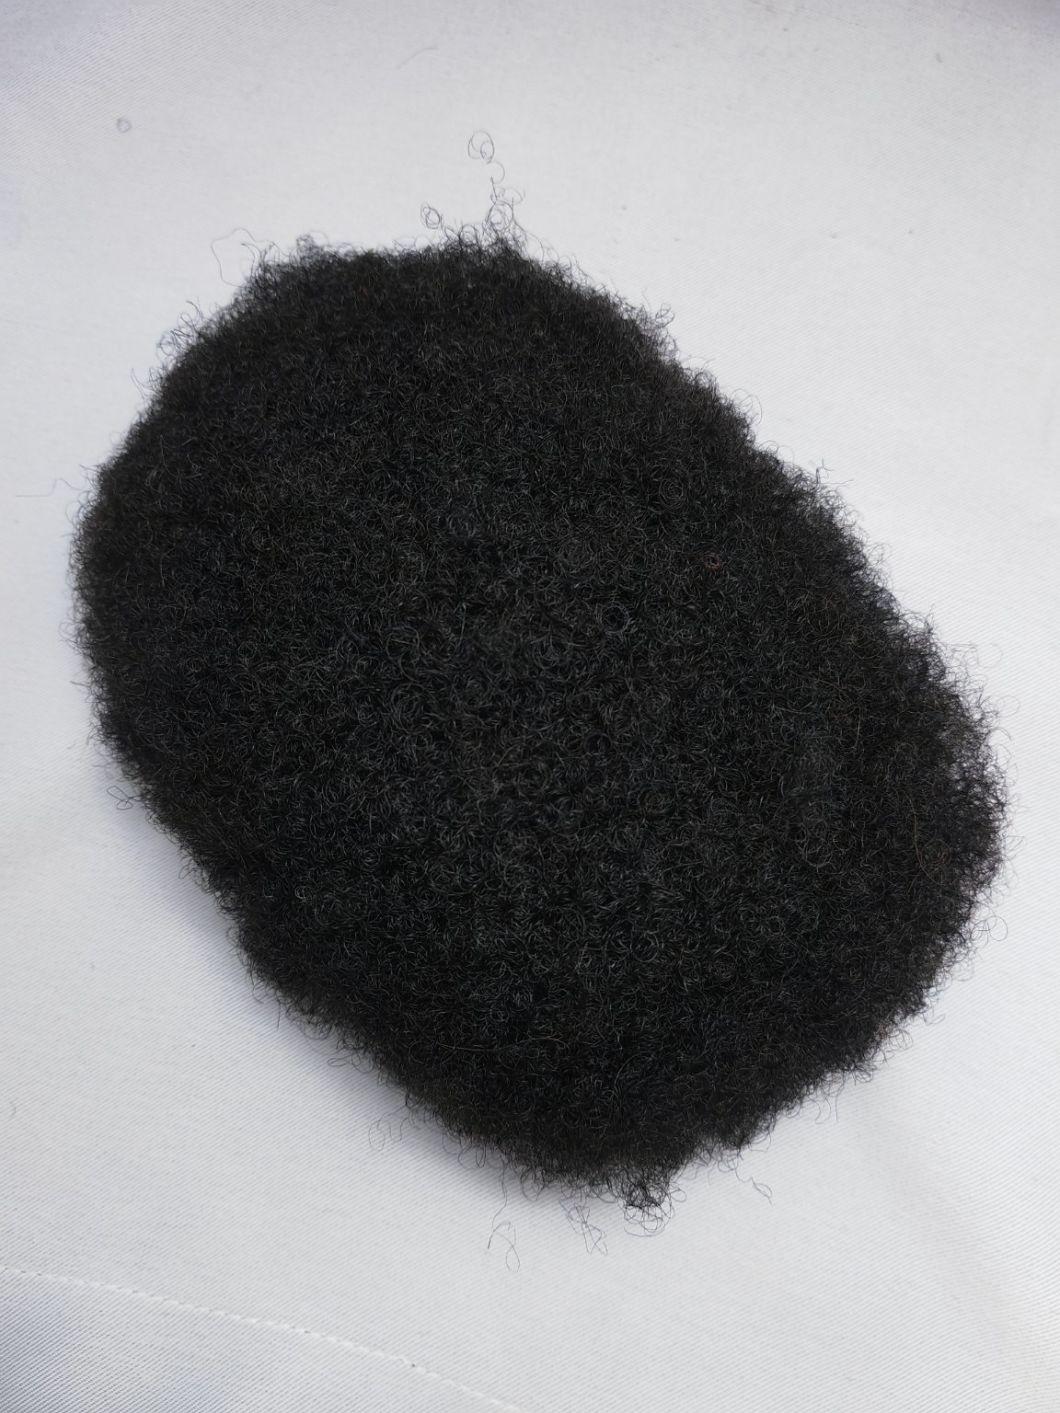 2022 Best Custom Made Comfortable Fine Mono Base Human Hair System Made of Remy Human Hair